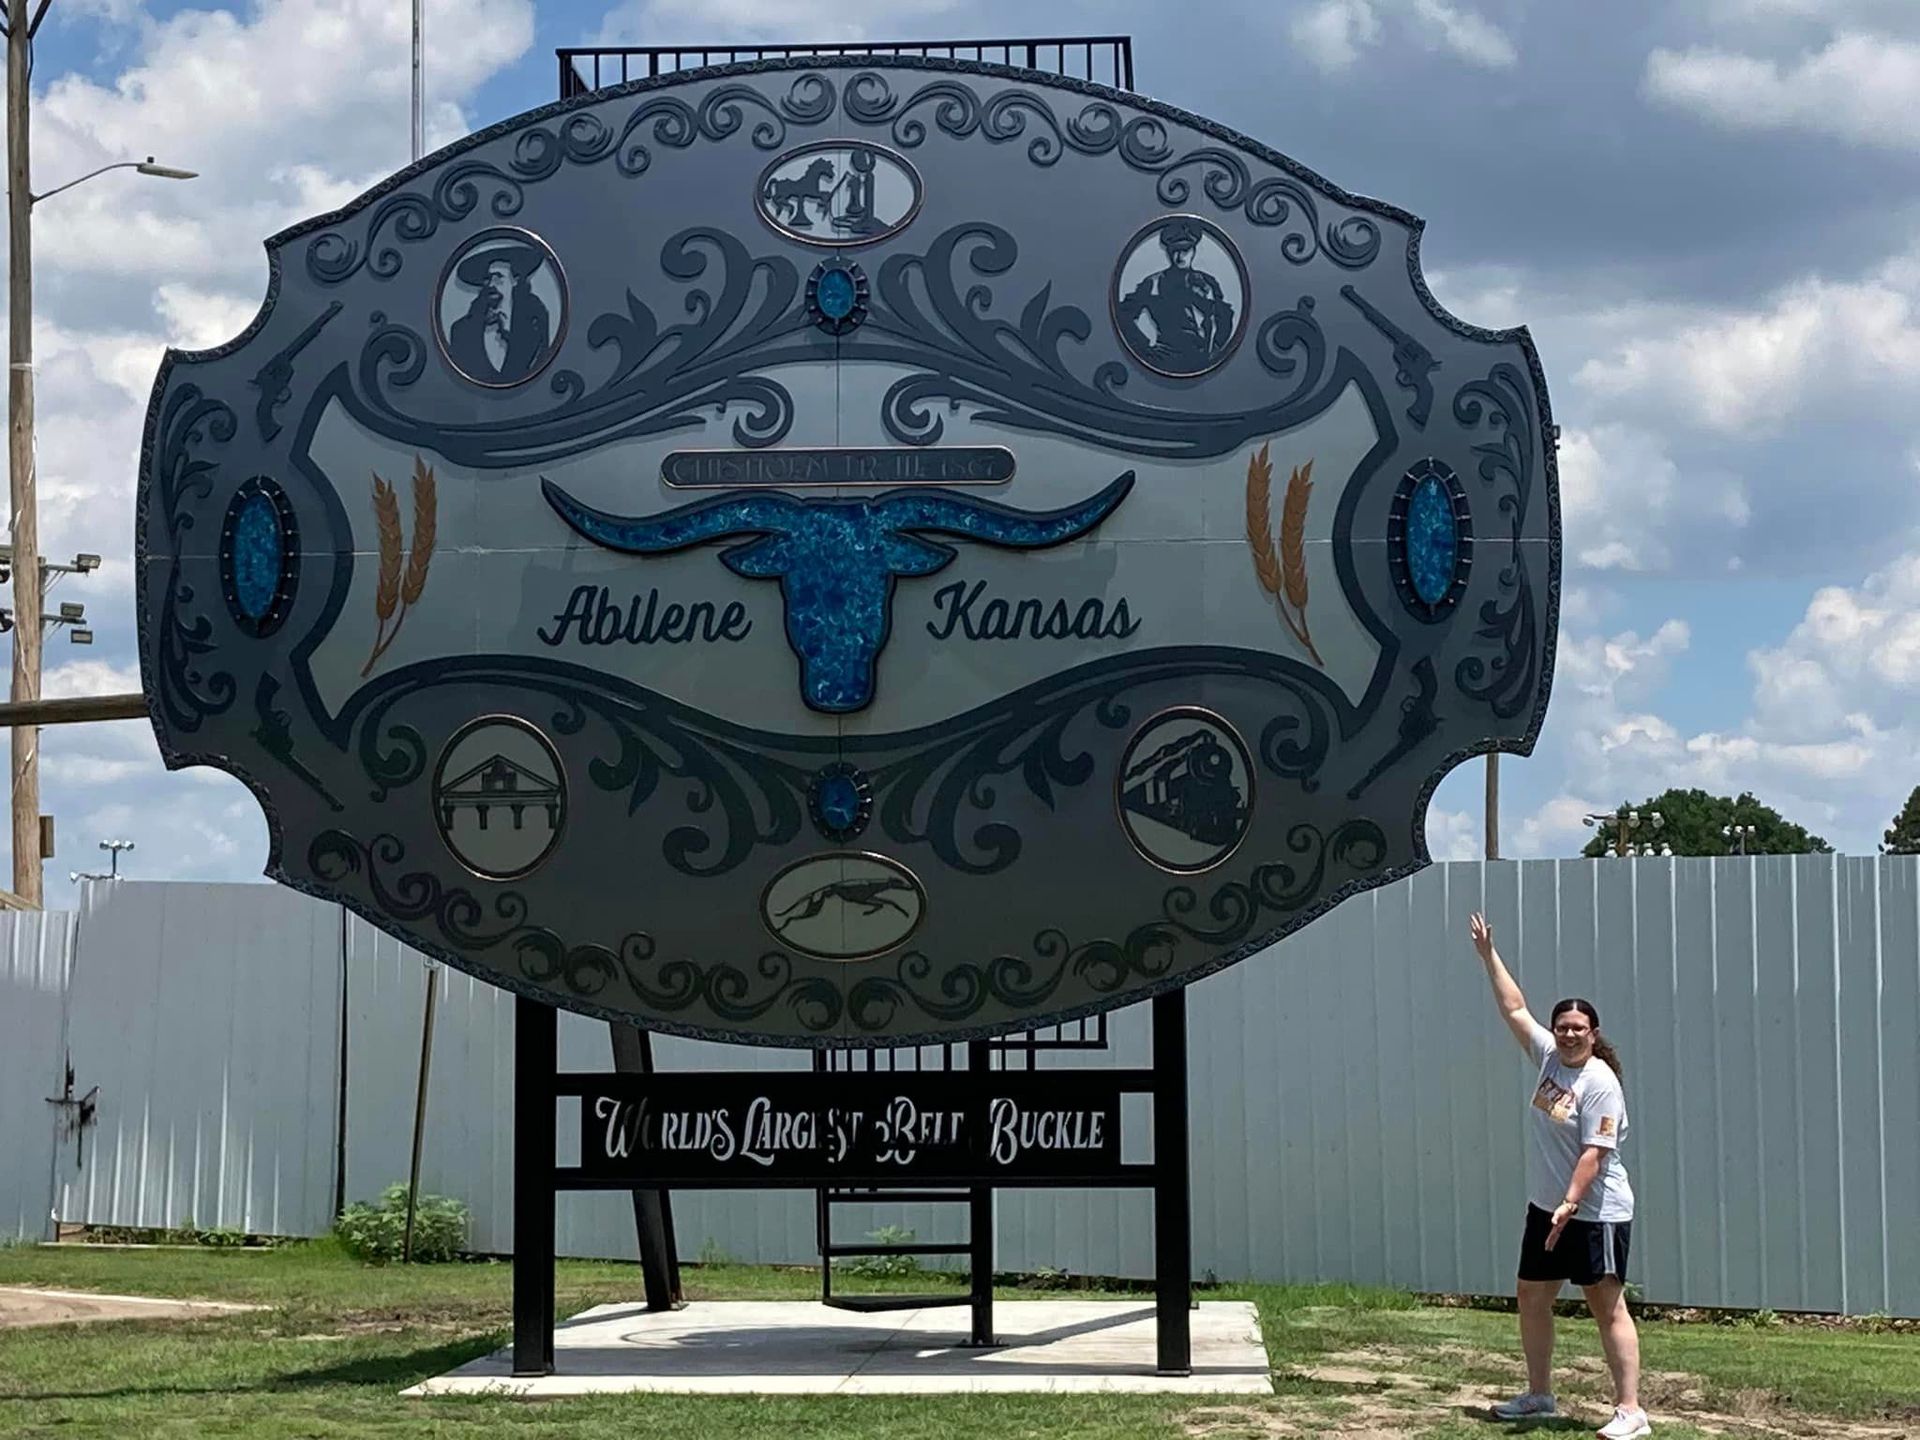 World’s Largest Belt Buckle: world record in Abilene, Kansas World’s Largest Belt Buckle: world record in Abilene, Kansas 24